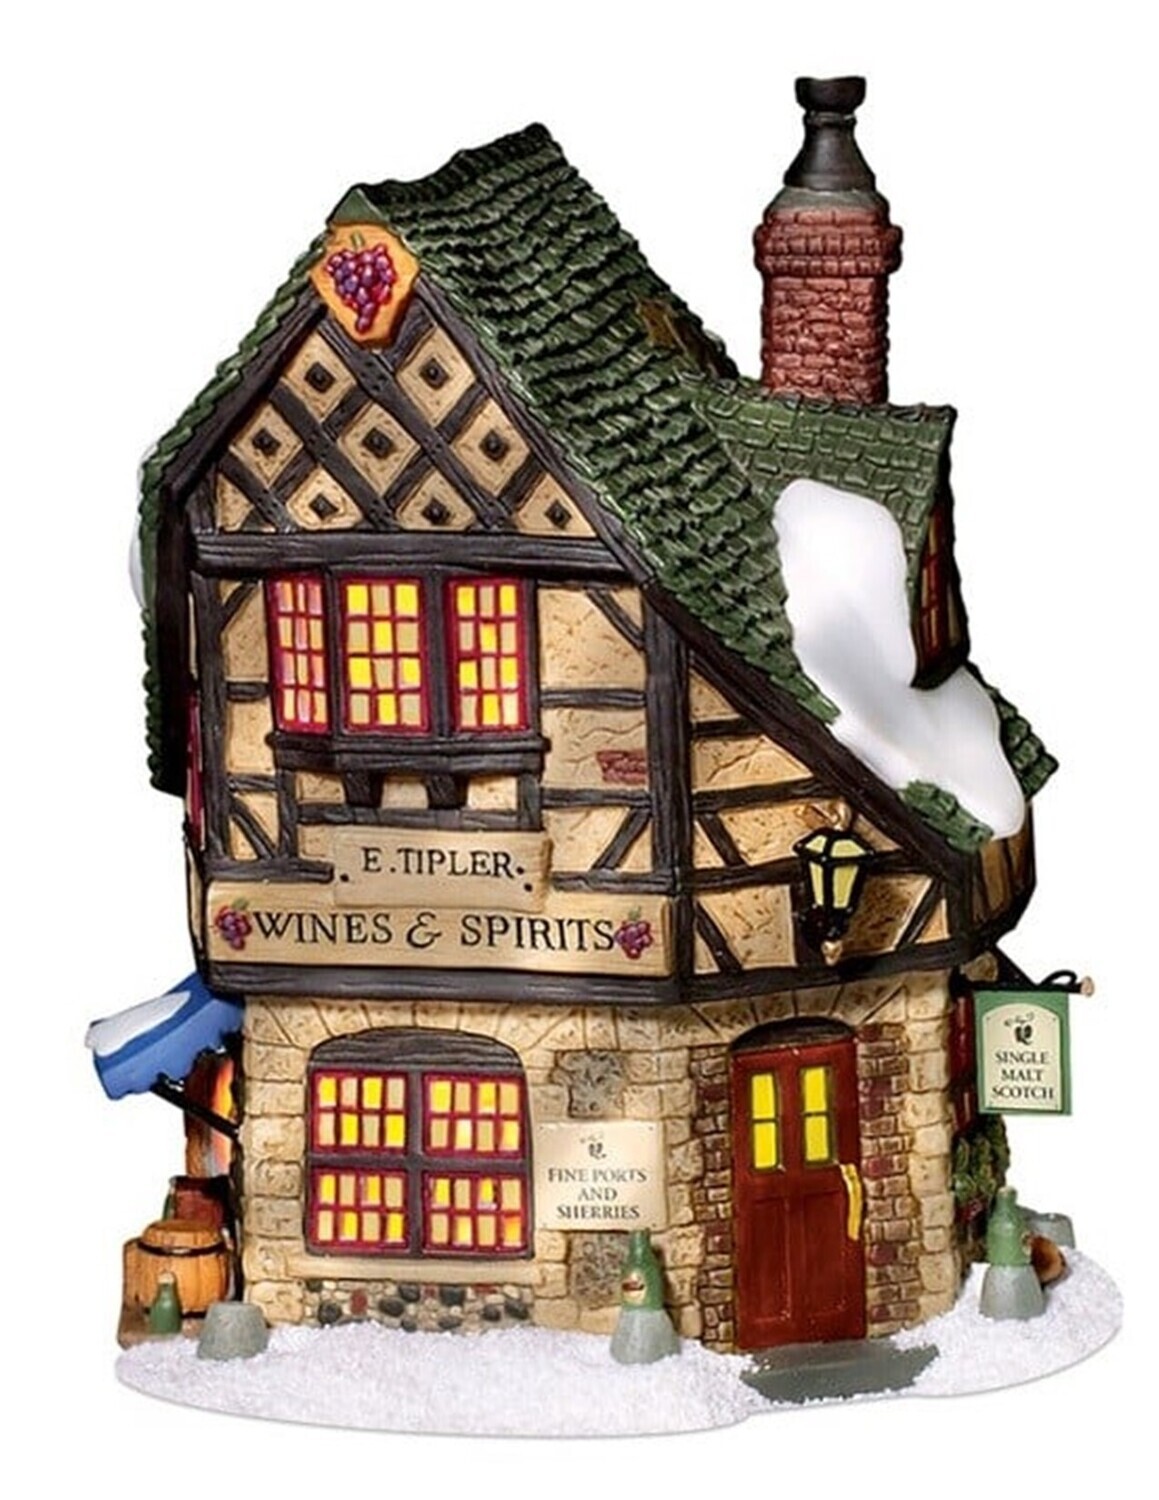 Department 56 Dickens Village "E Tipler, Agent for Wines & Spirits" Building (56.58725)